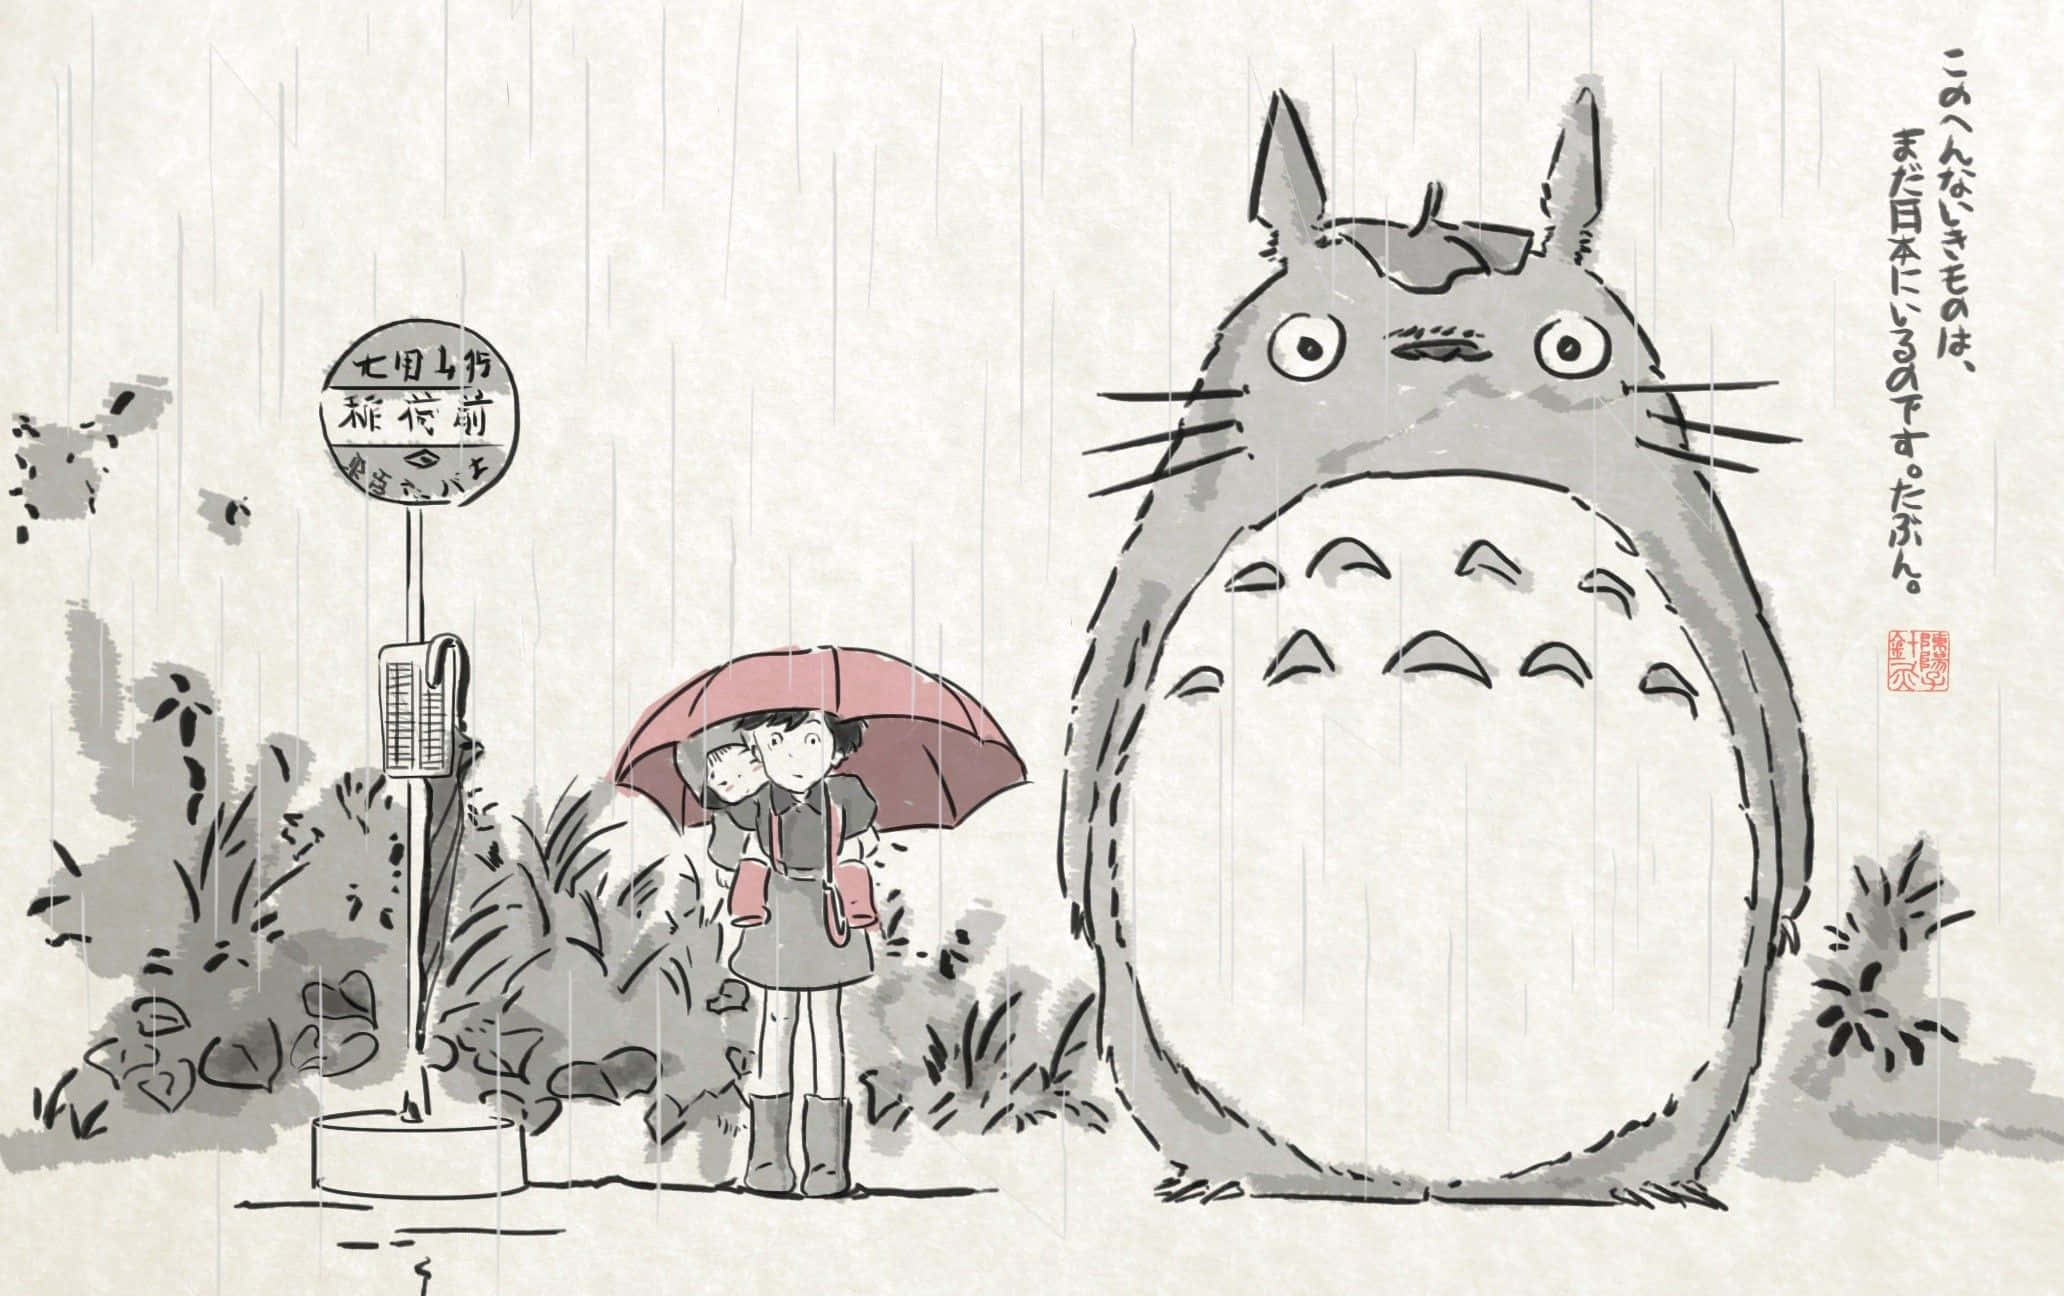 Download Enjoying the beauty of nature with Totoro | Wallpapers.com